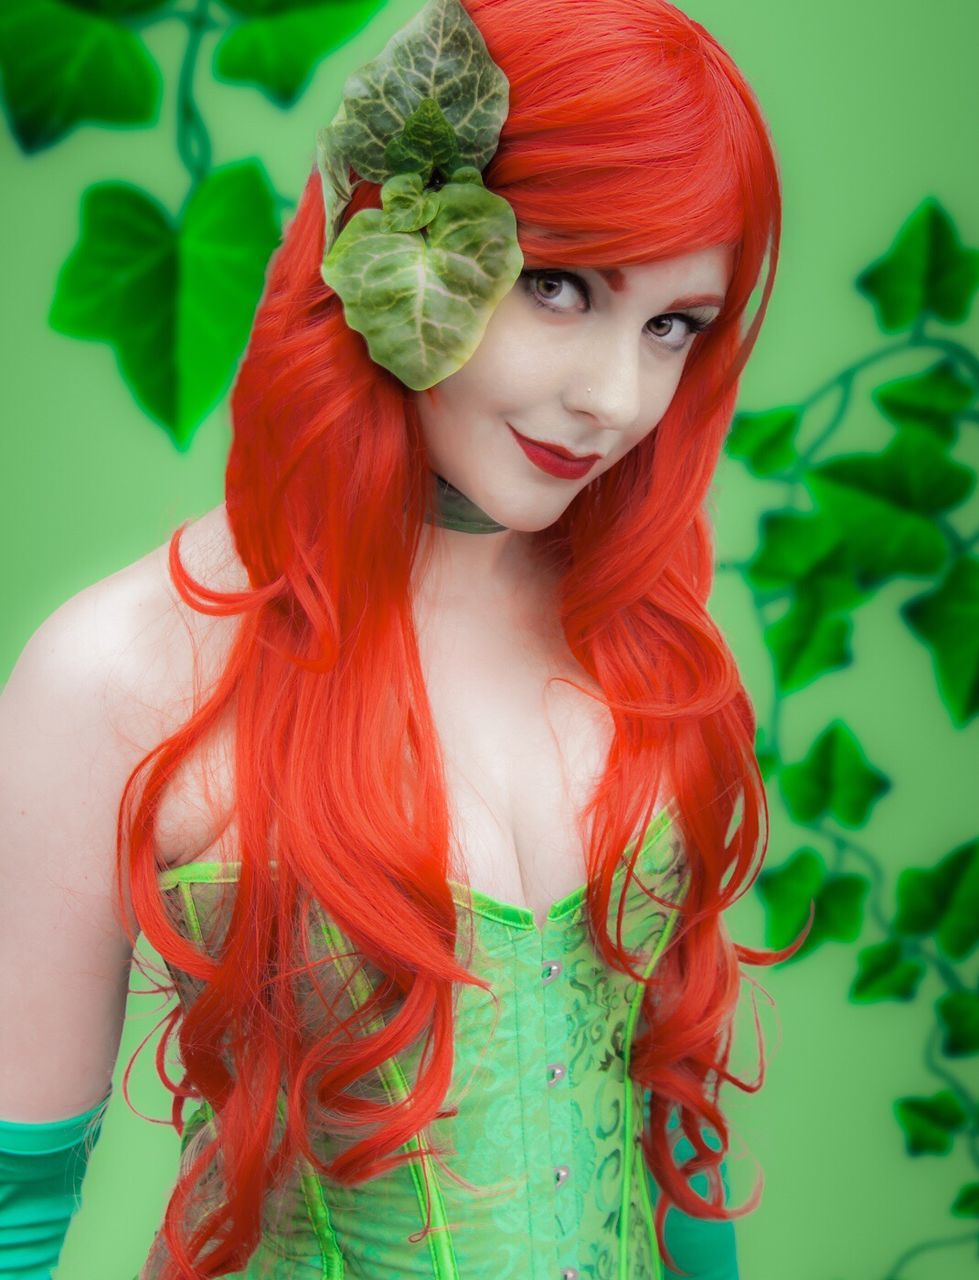 long hair, young women, beauty, close-up, focus on foreground, young adult, red, person, vibrant color, green, dyed hair